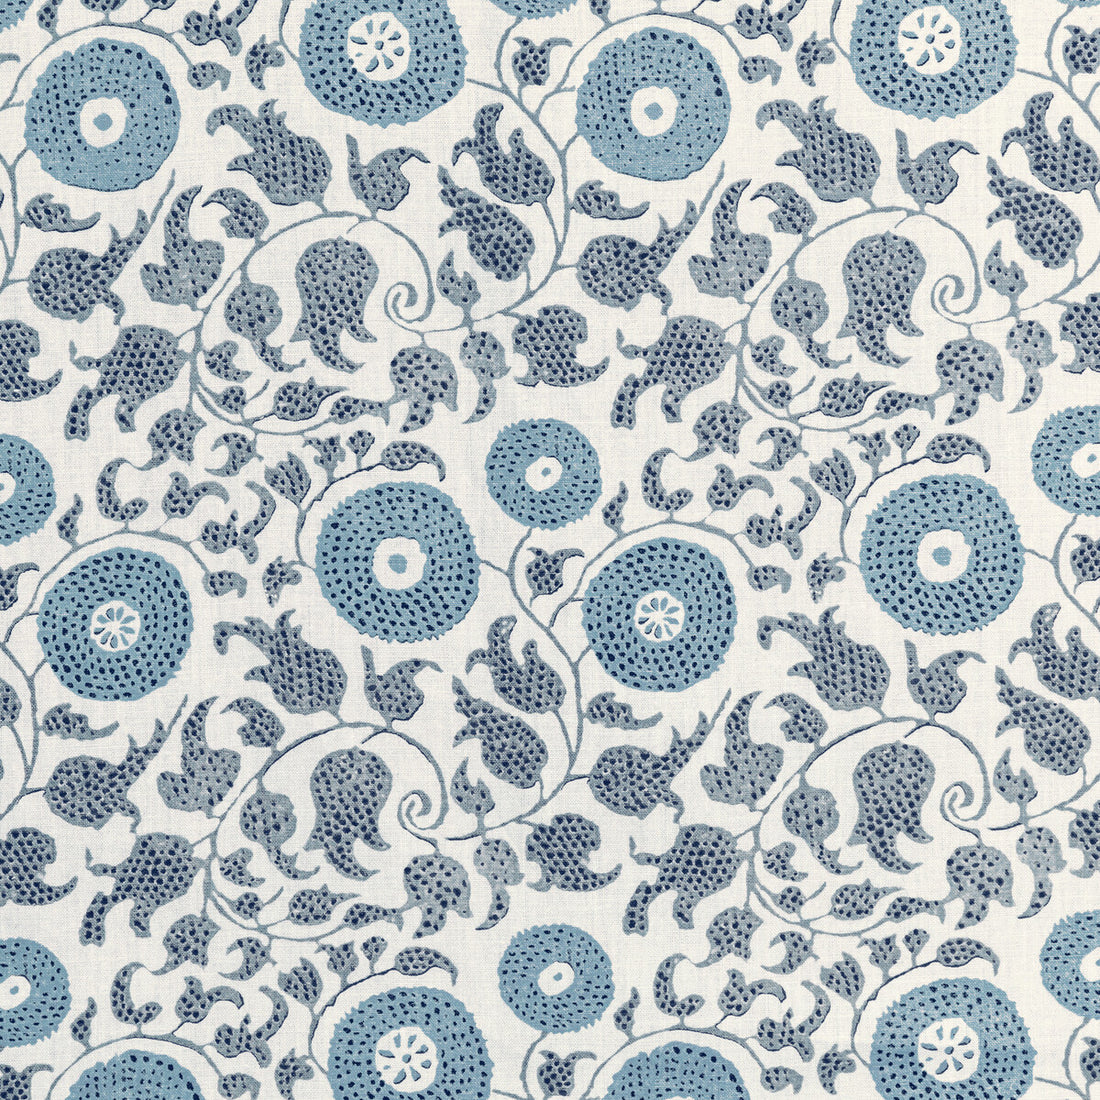 Eldora Print fabric in slate color - pattern 2020204.5.0 - by Lee Jofa in the Breckenridge collection